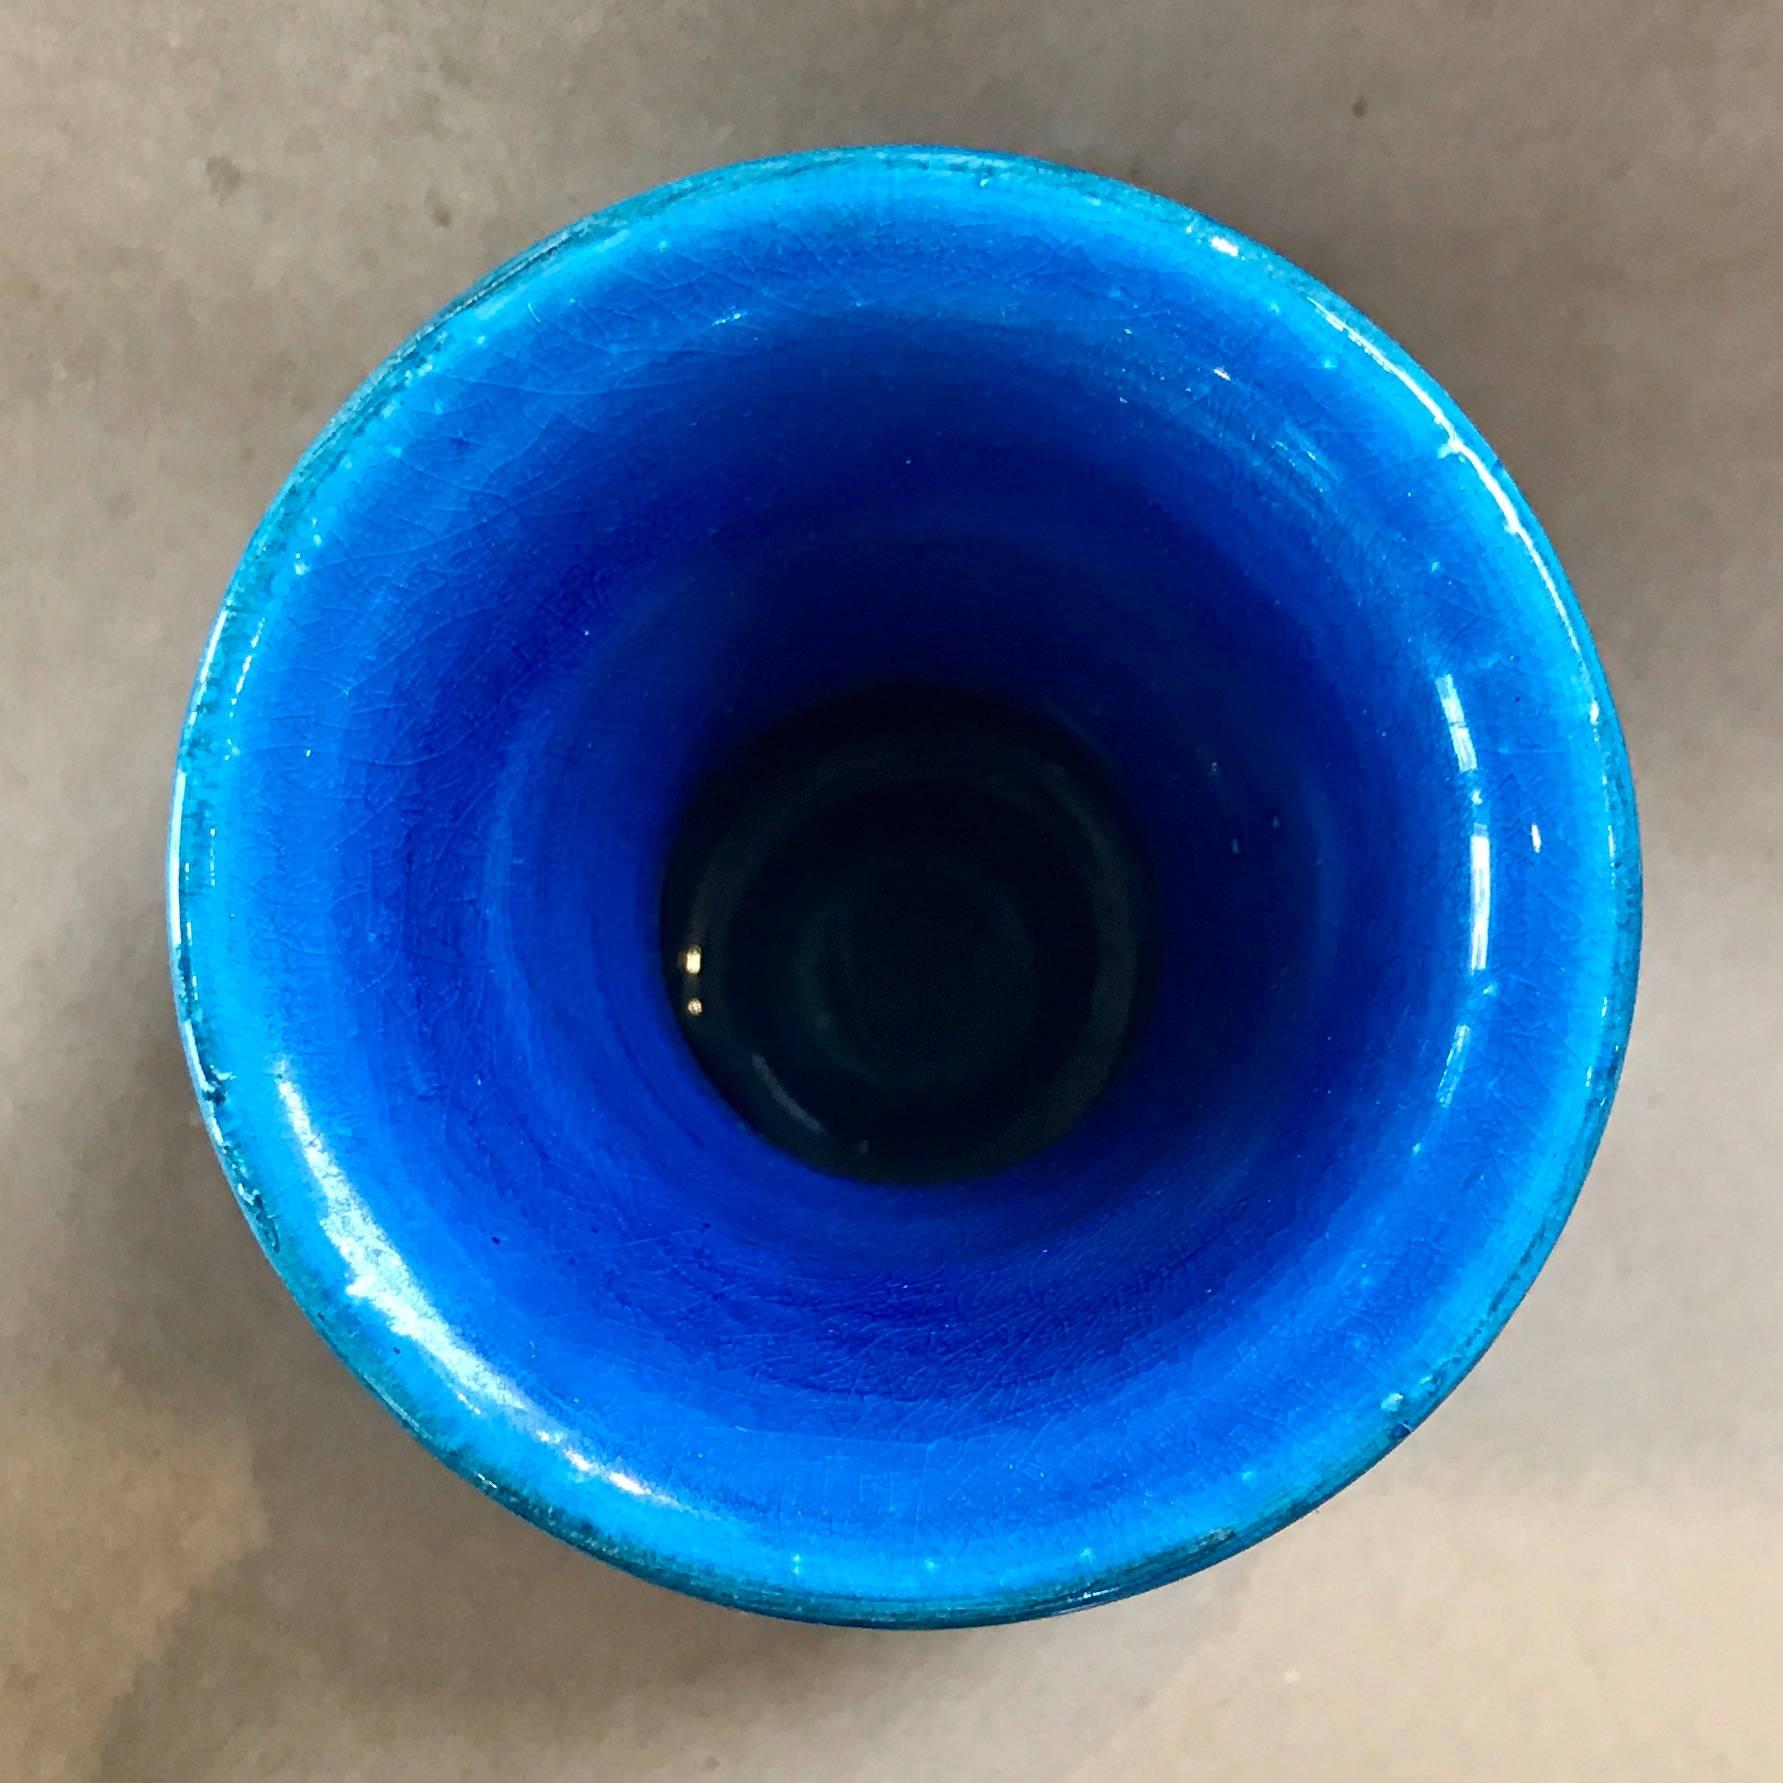 1970s, Mid-Century Modern blue ceramic vase by Bitossi or Flavia. Vivid Rimini blue glaze with subtle green accents and characteristic Bitossi details. Marked 